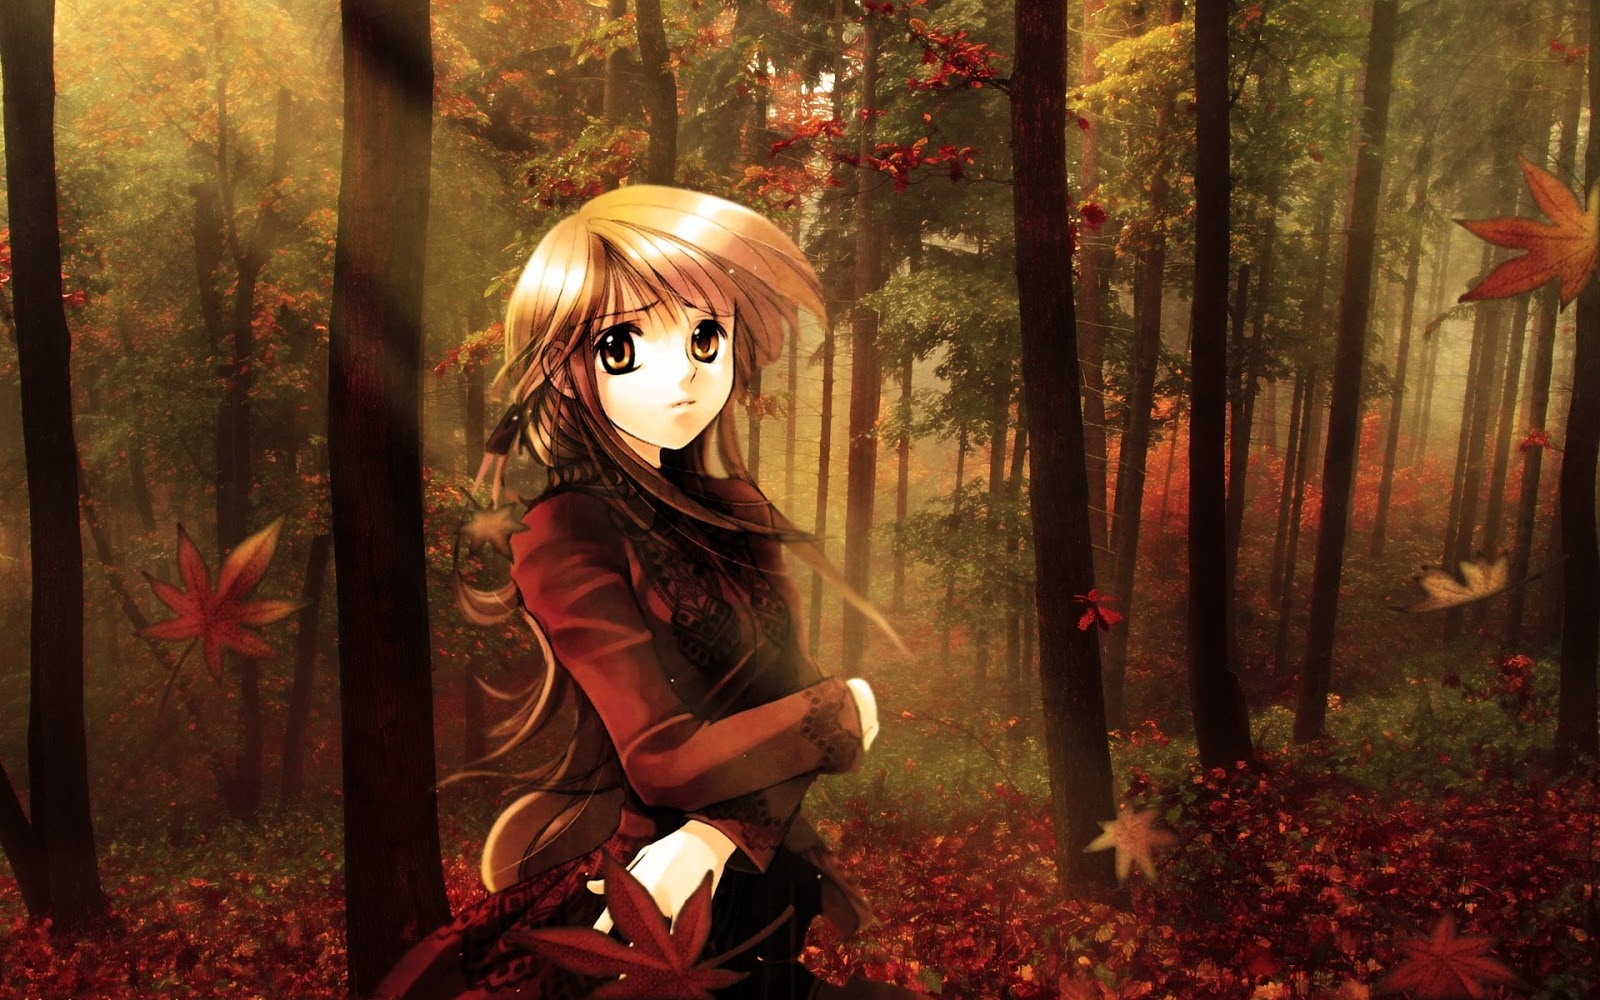 Autumn Anime Aesthetic Wallpapers - Wallpaper Cave